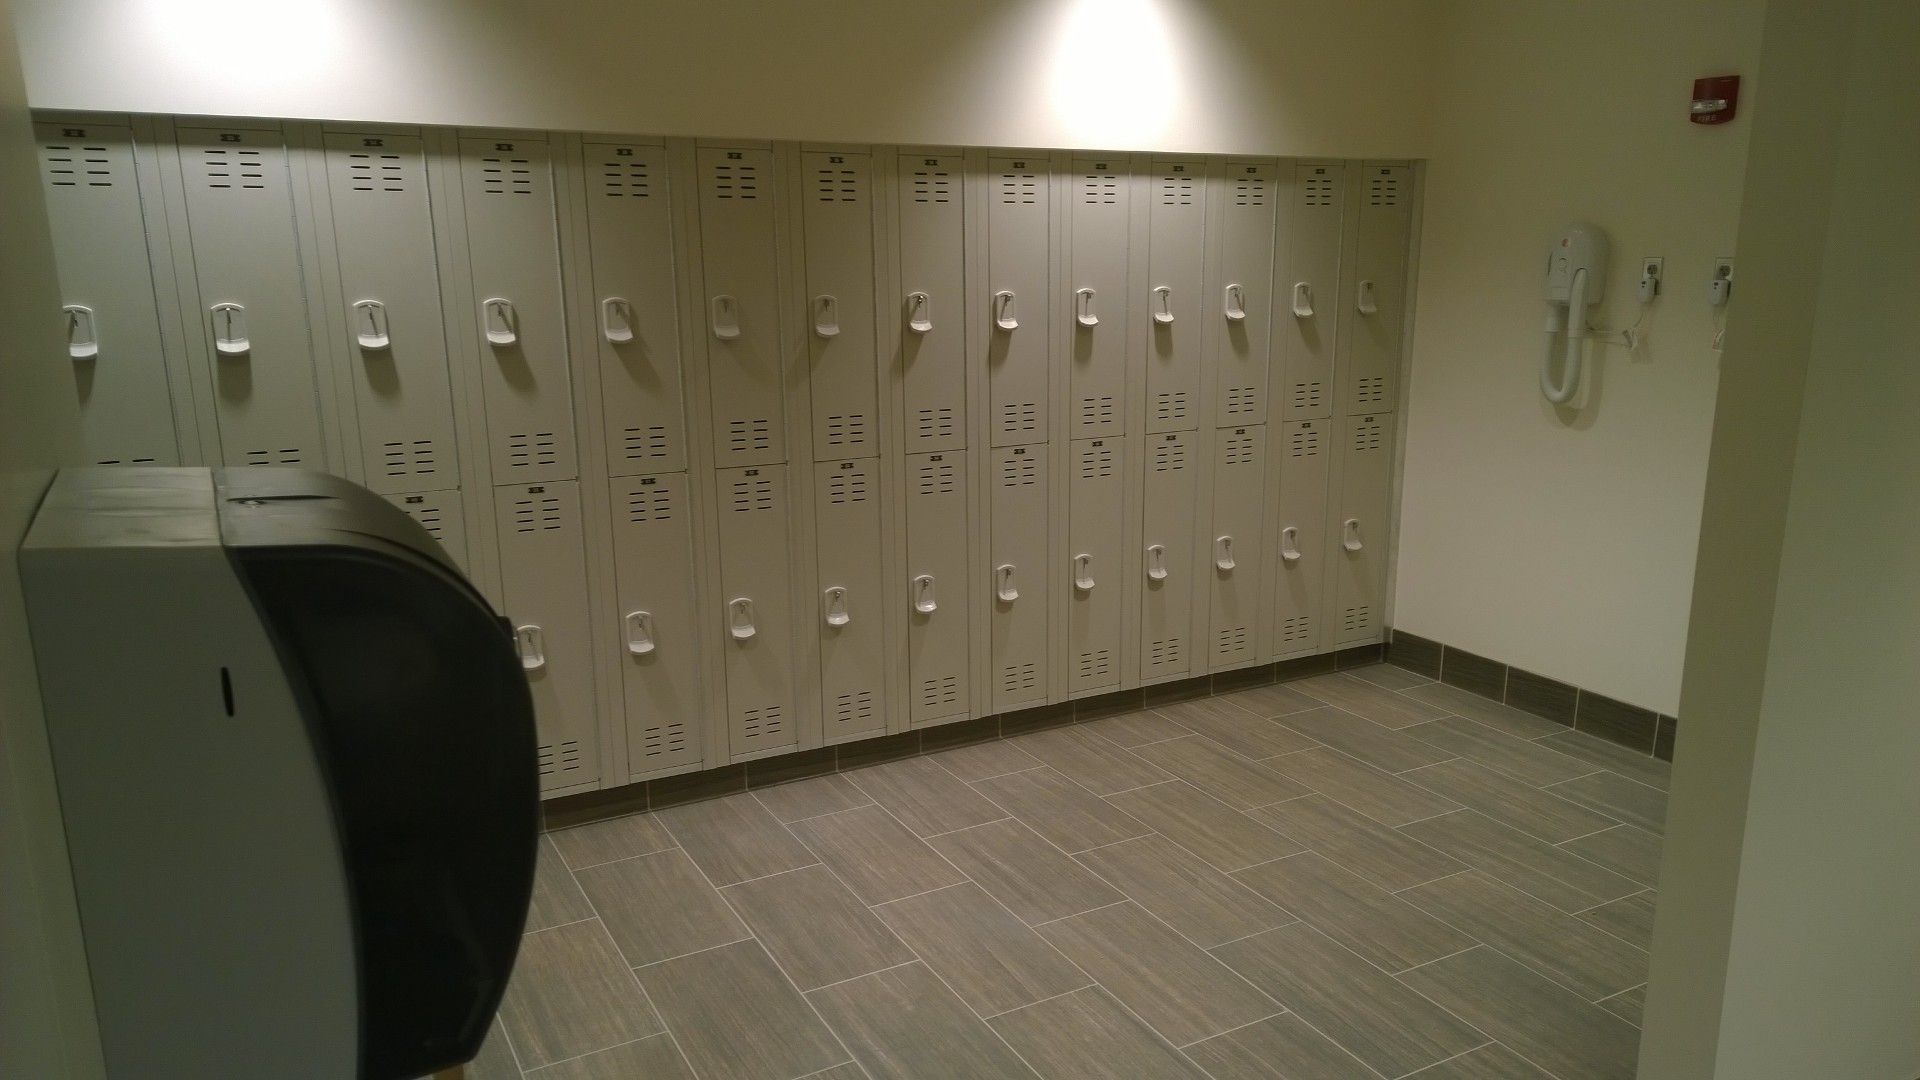 Tufftec Lockers in a matching color to the partitions contributed to the clean, modern design.